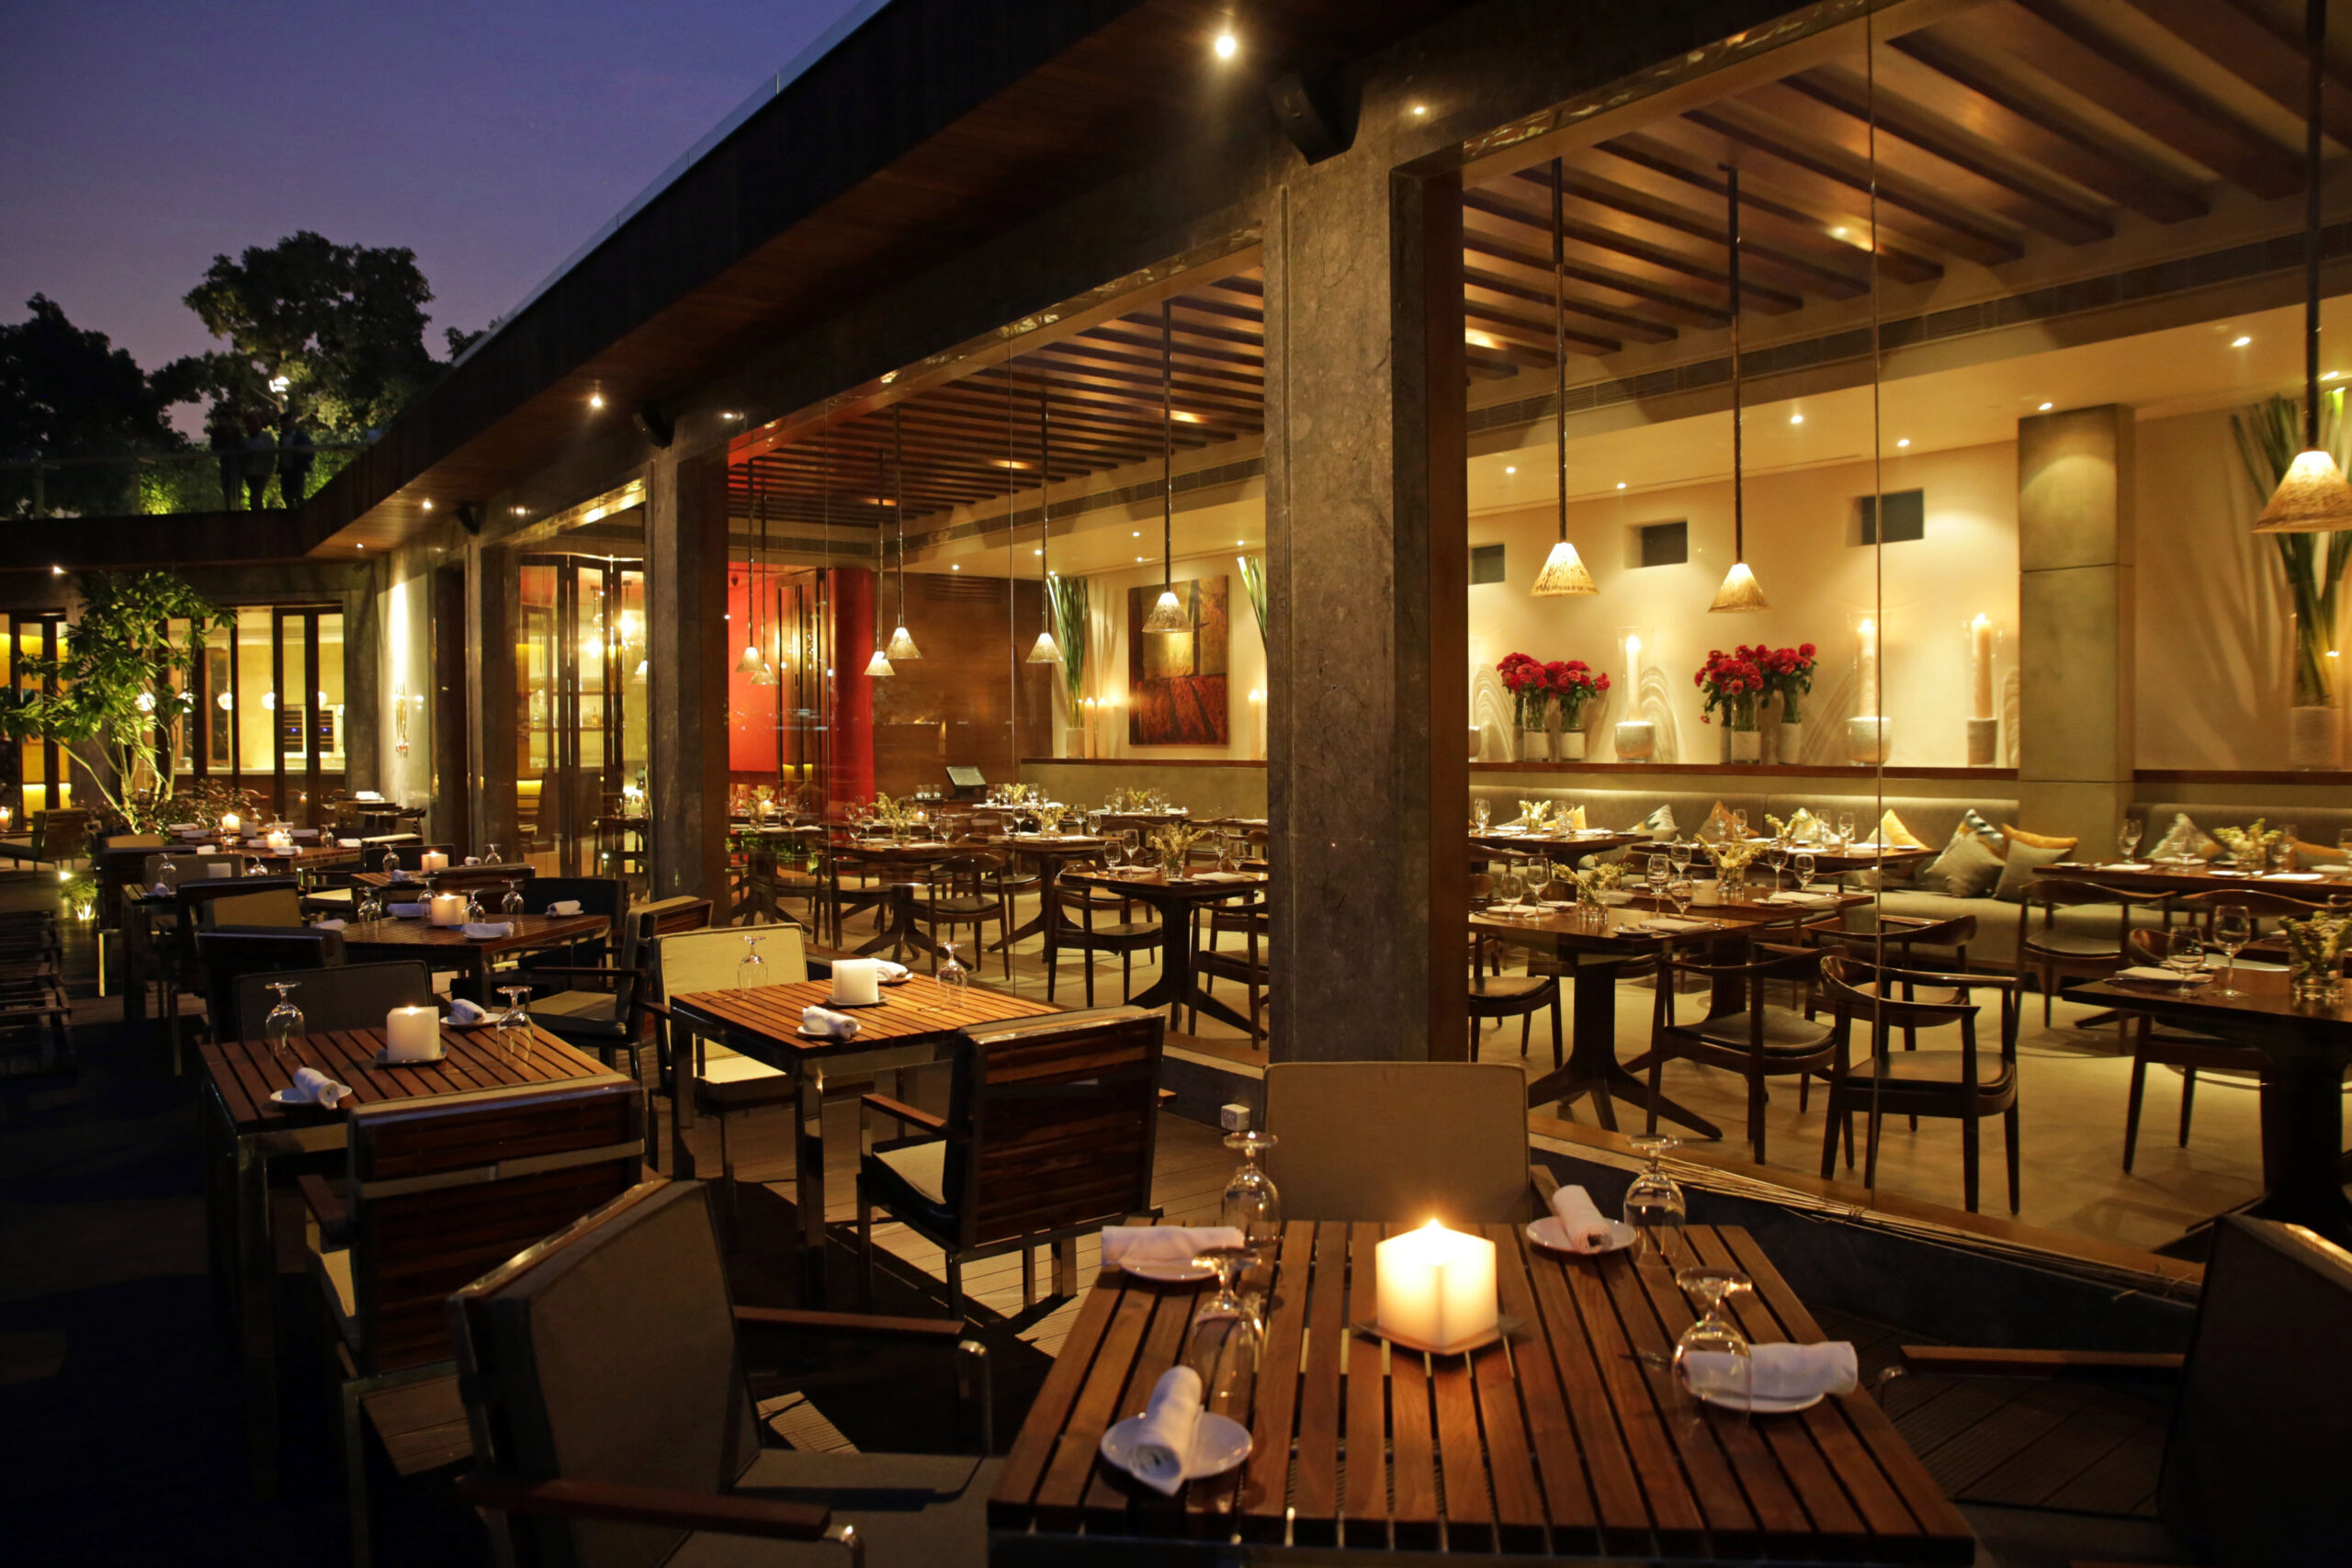 3 Excellent Eatries For Casual Dining In Delhi